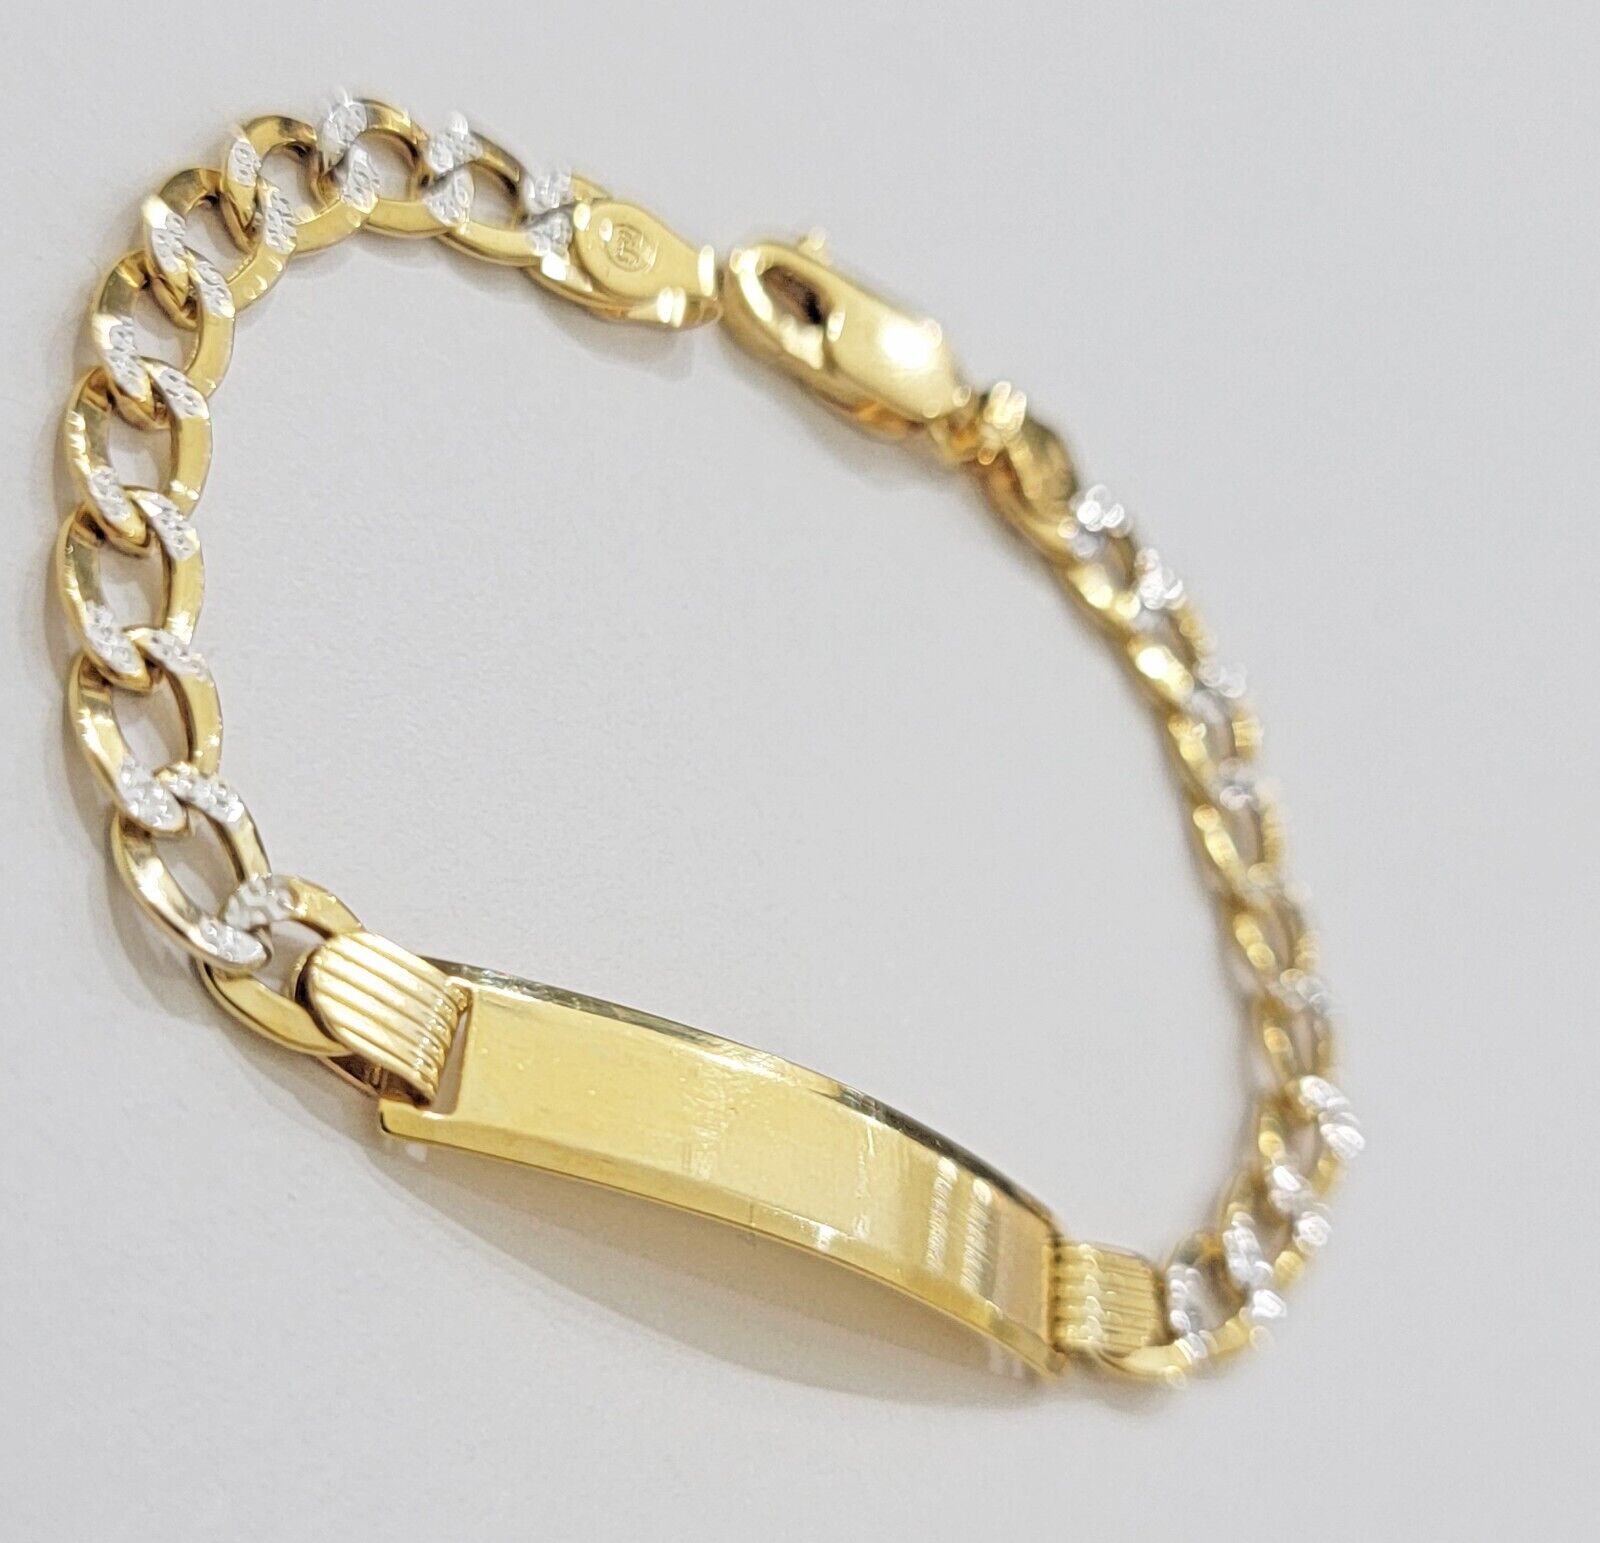 Genuine Gold Baby ID Bracelet | Italian-Made, Customizable, 10kt & 14kt options 10kt Gold / Curb Link / Heart